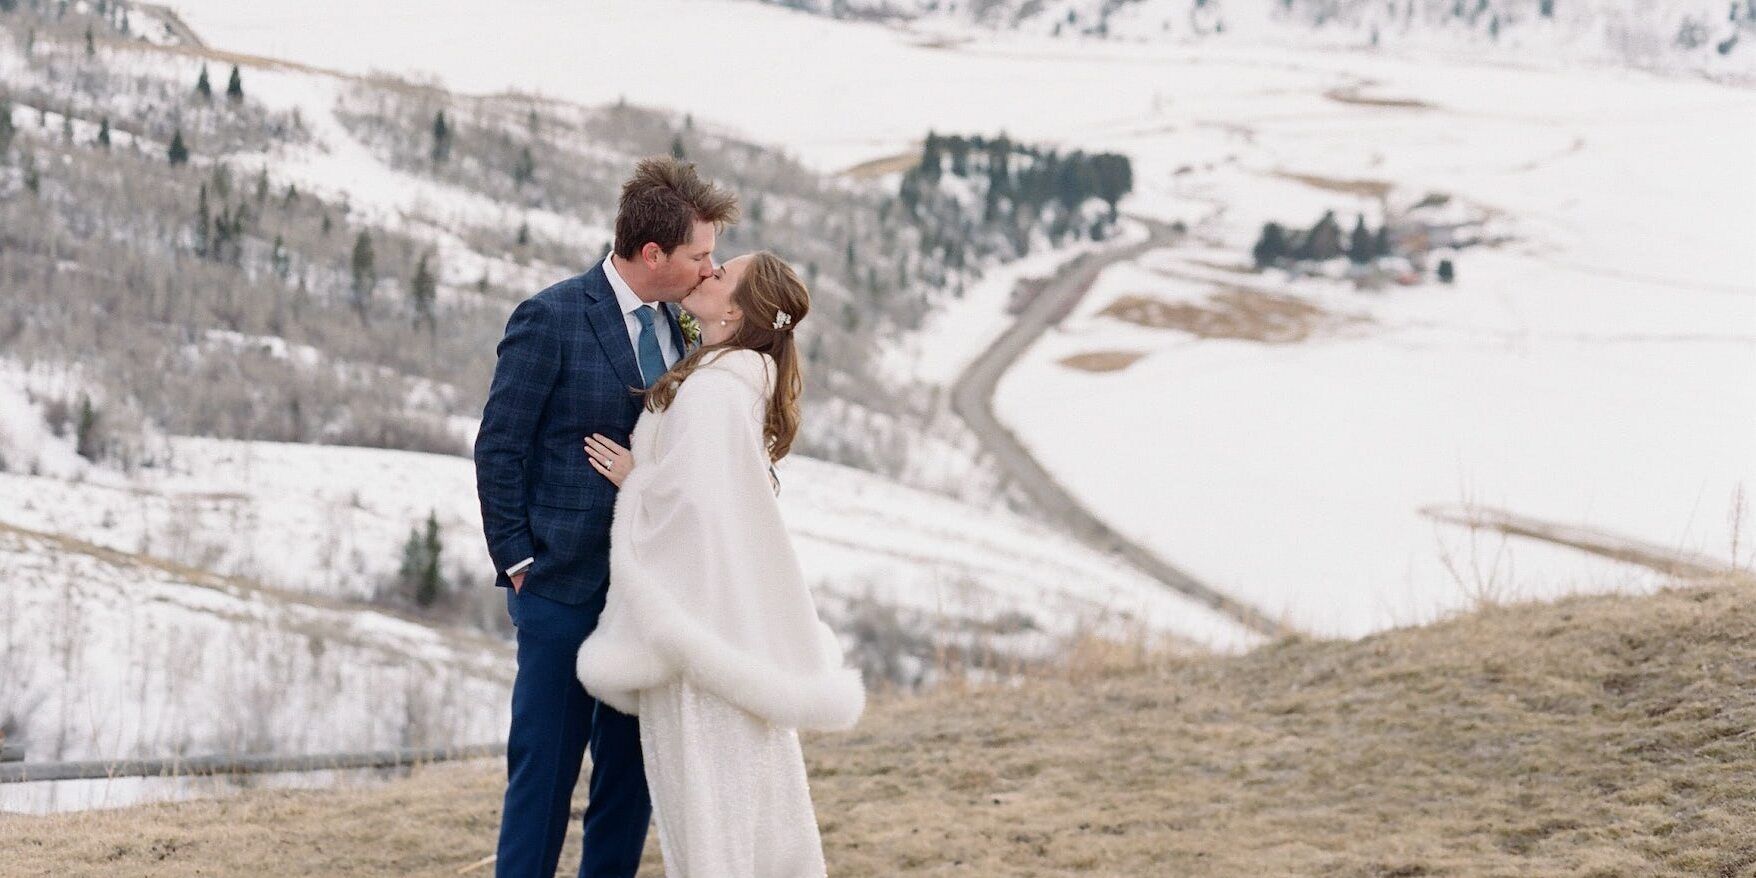 Winter wedding details: A bride and groom embrace before their winter wedding ceremony in Wyoming.